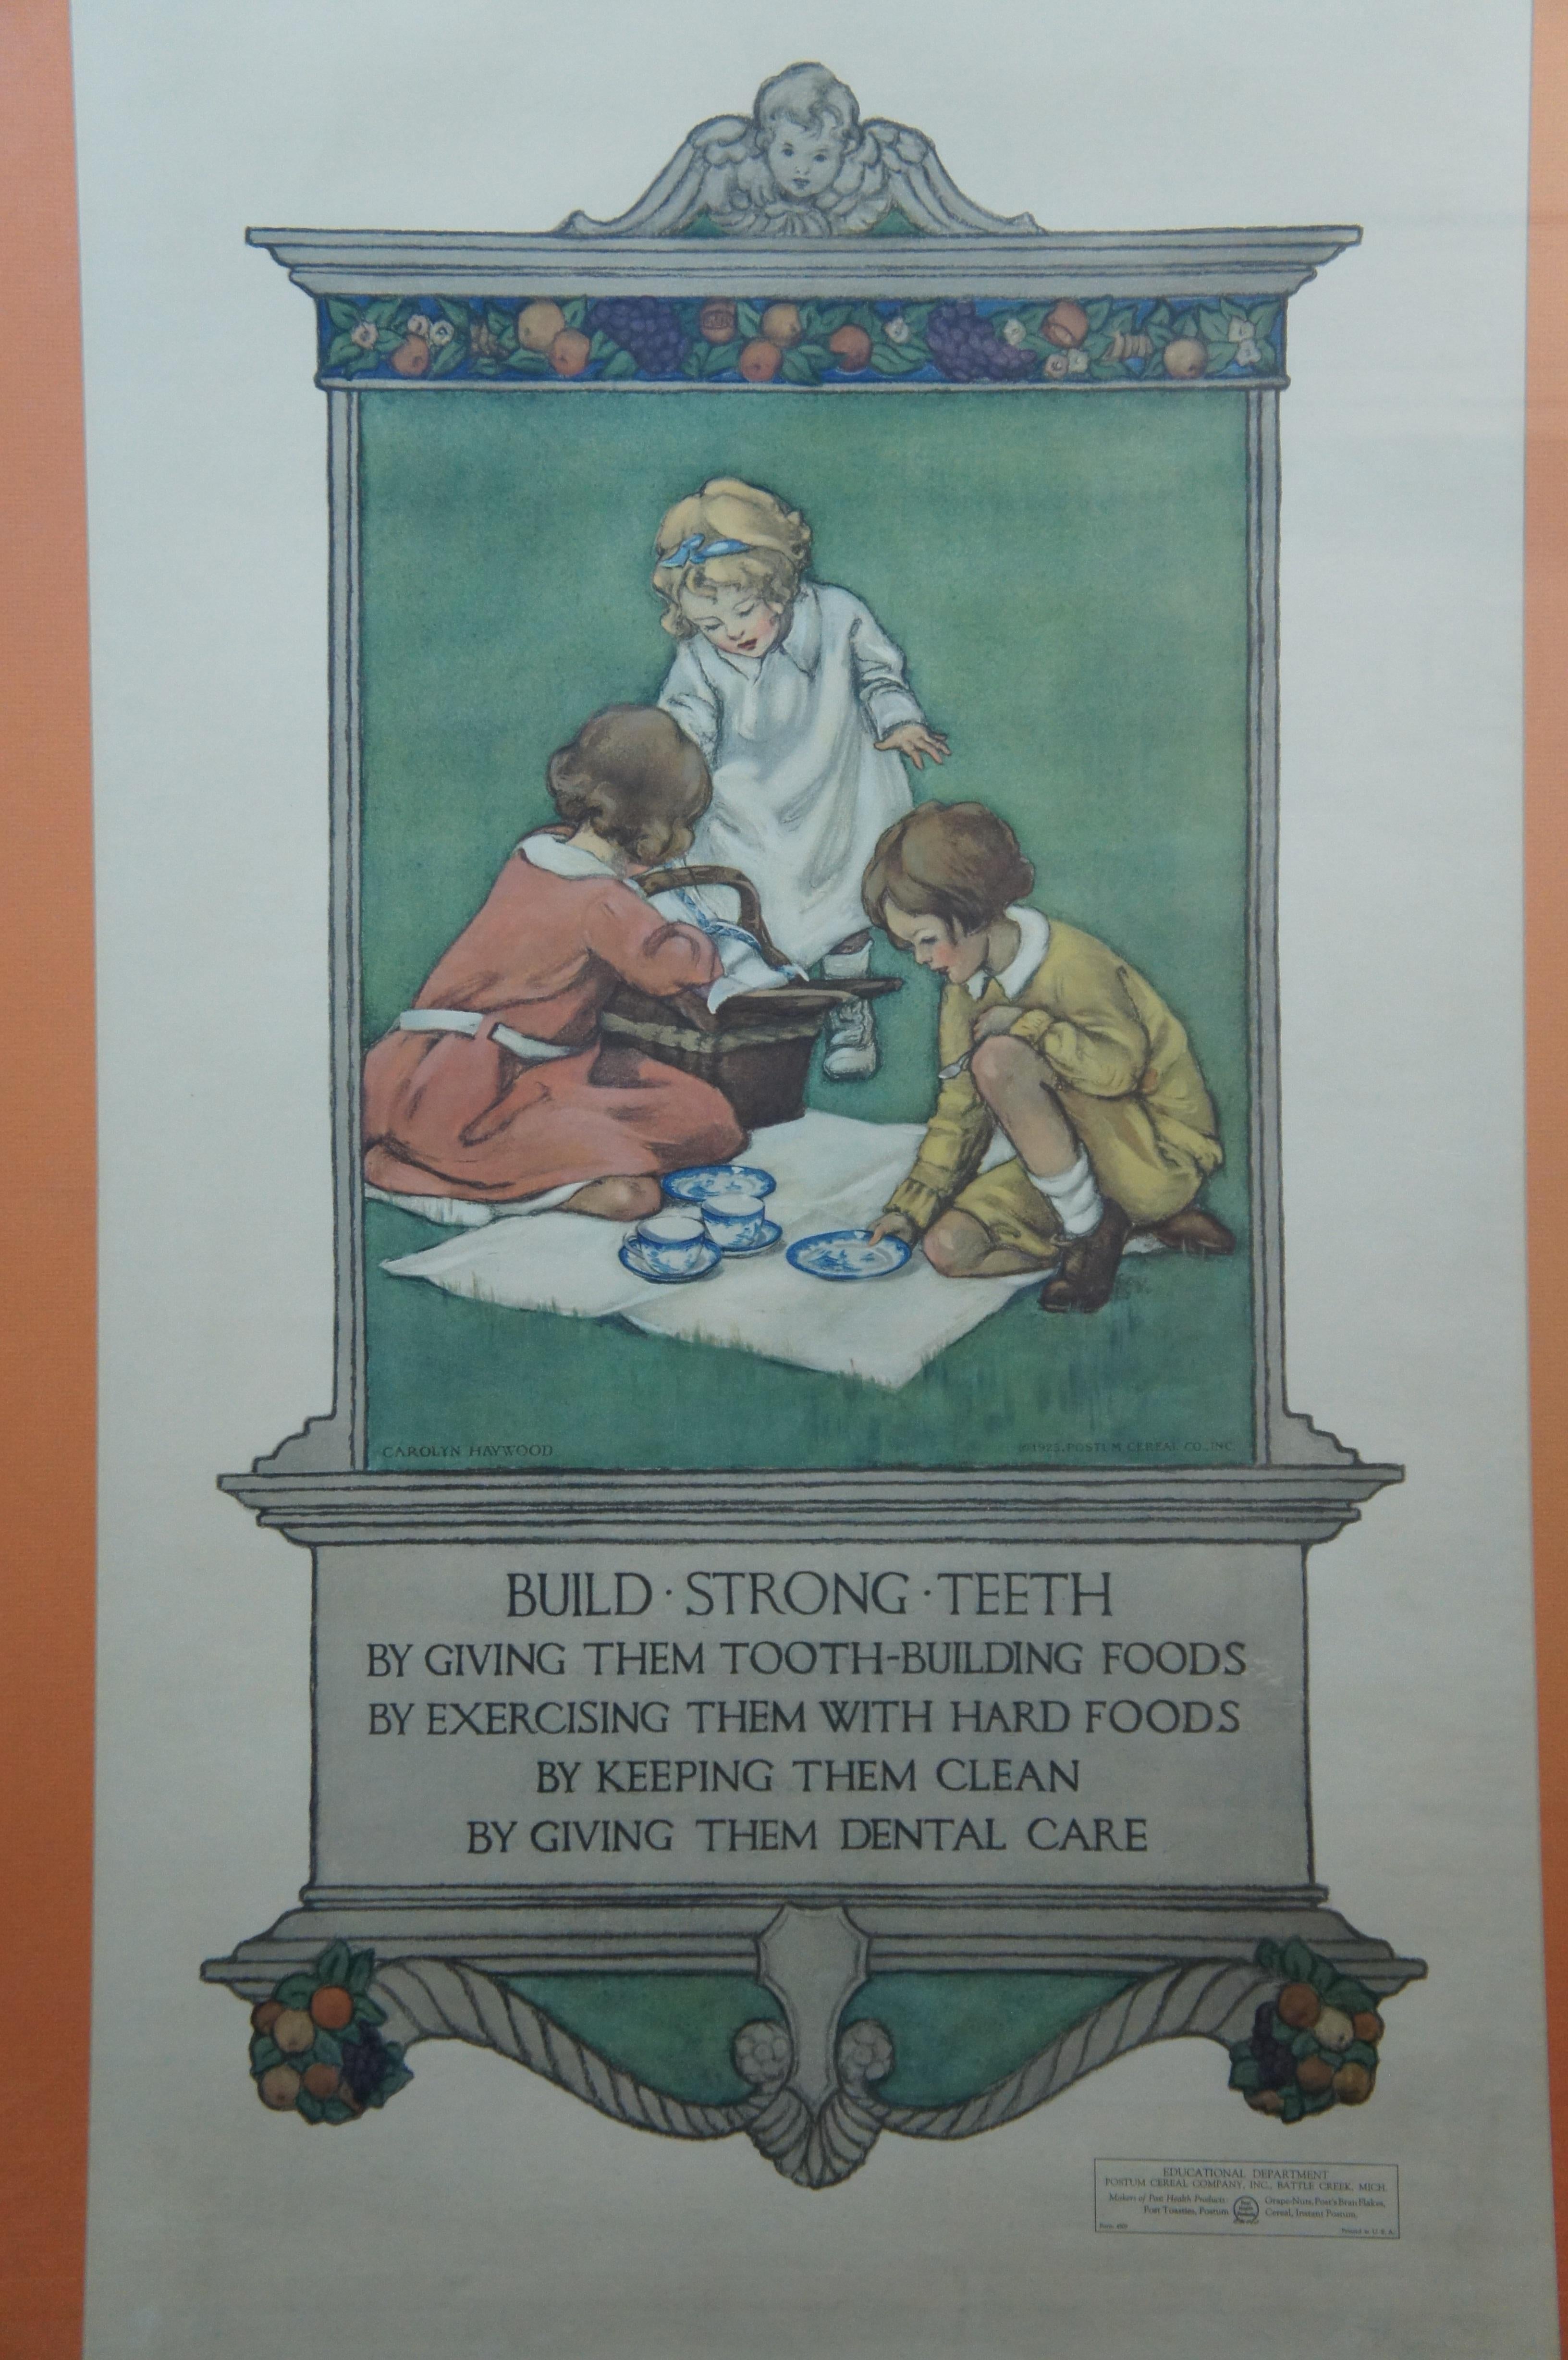 Paper Antique 1925 Post Cereal Carolyn Haywood Build Strong Teeth Ad Poster 45